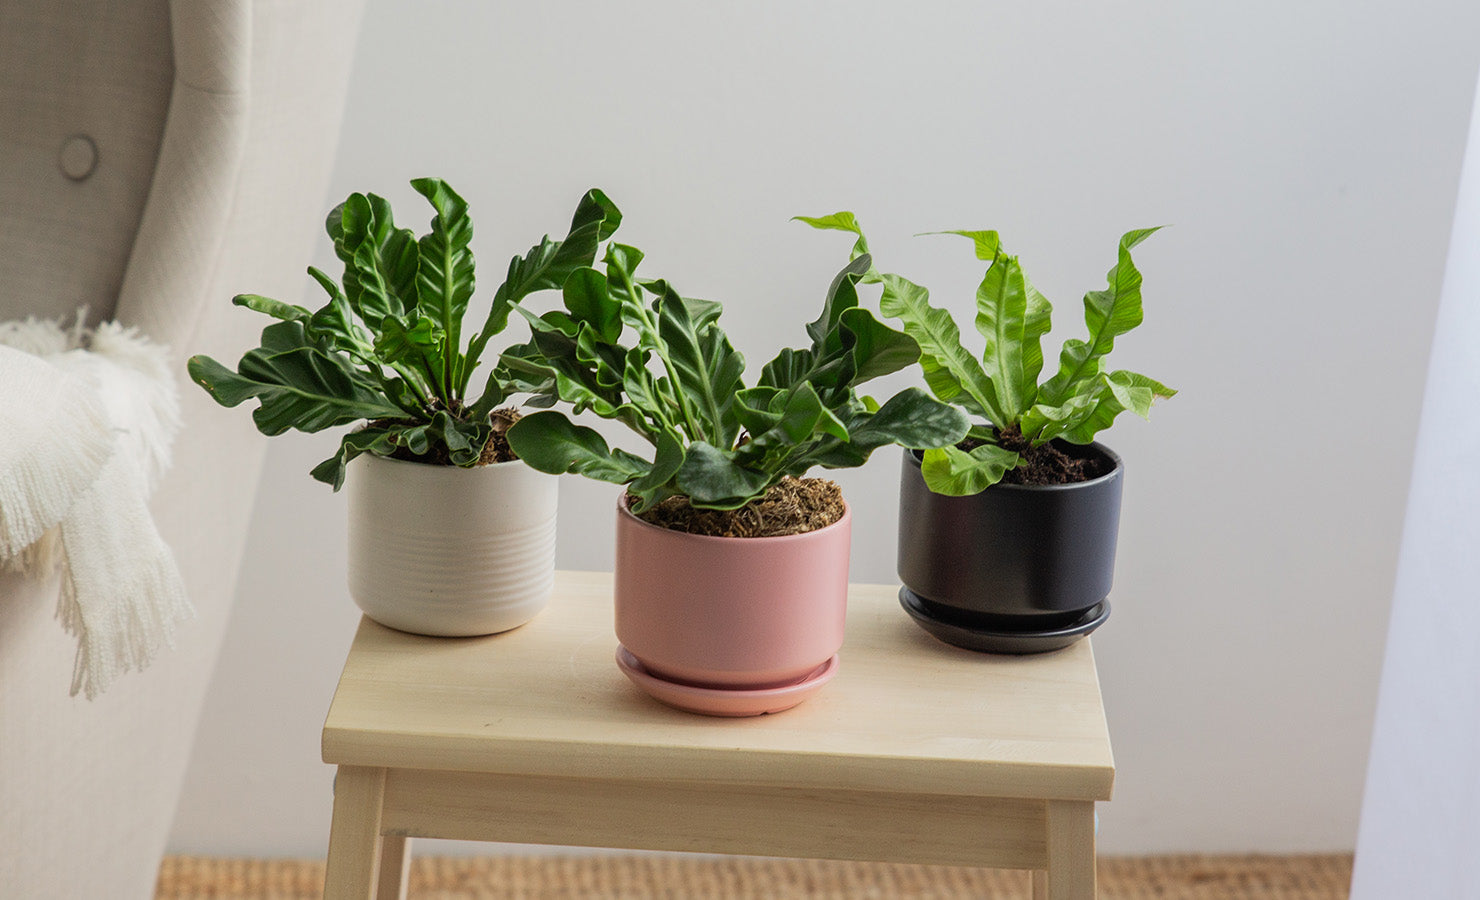 8 Fun and Fabulous Pet-Friendly Flowers and Plants Crispy Wave Fern | BloomThis